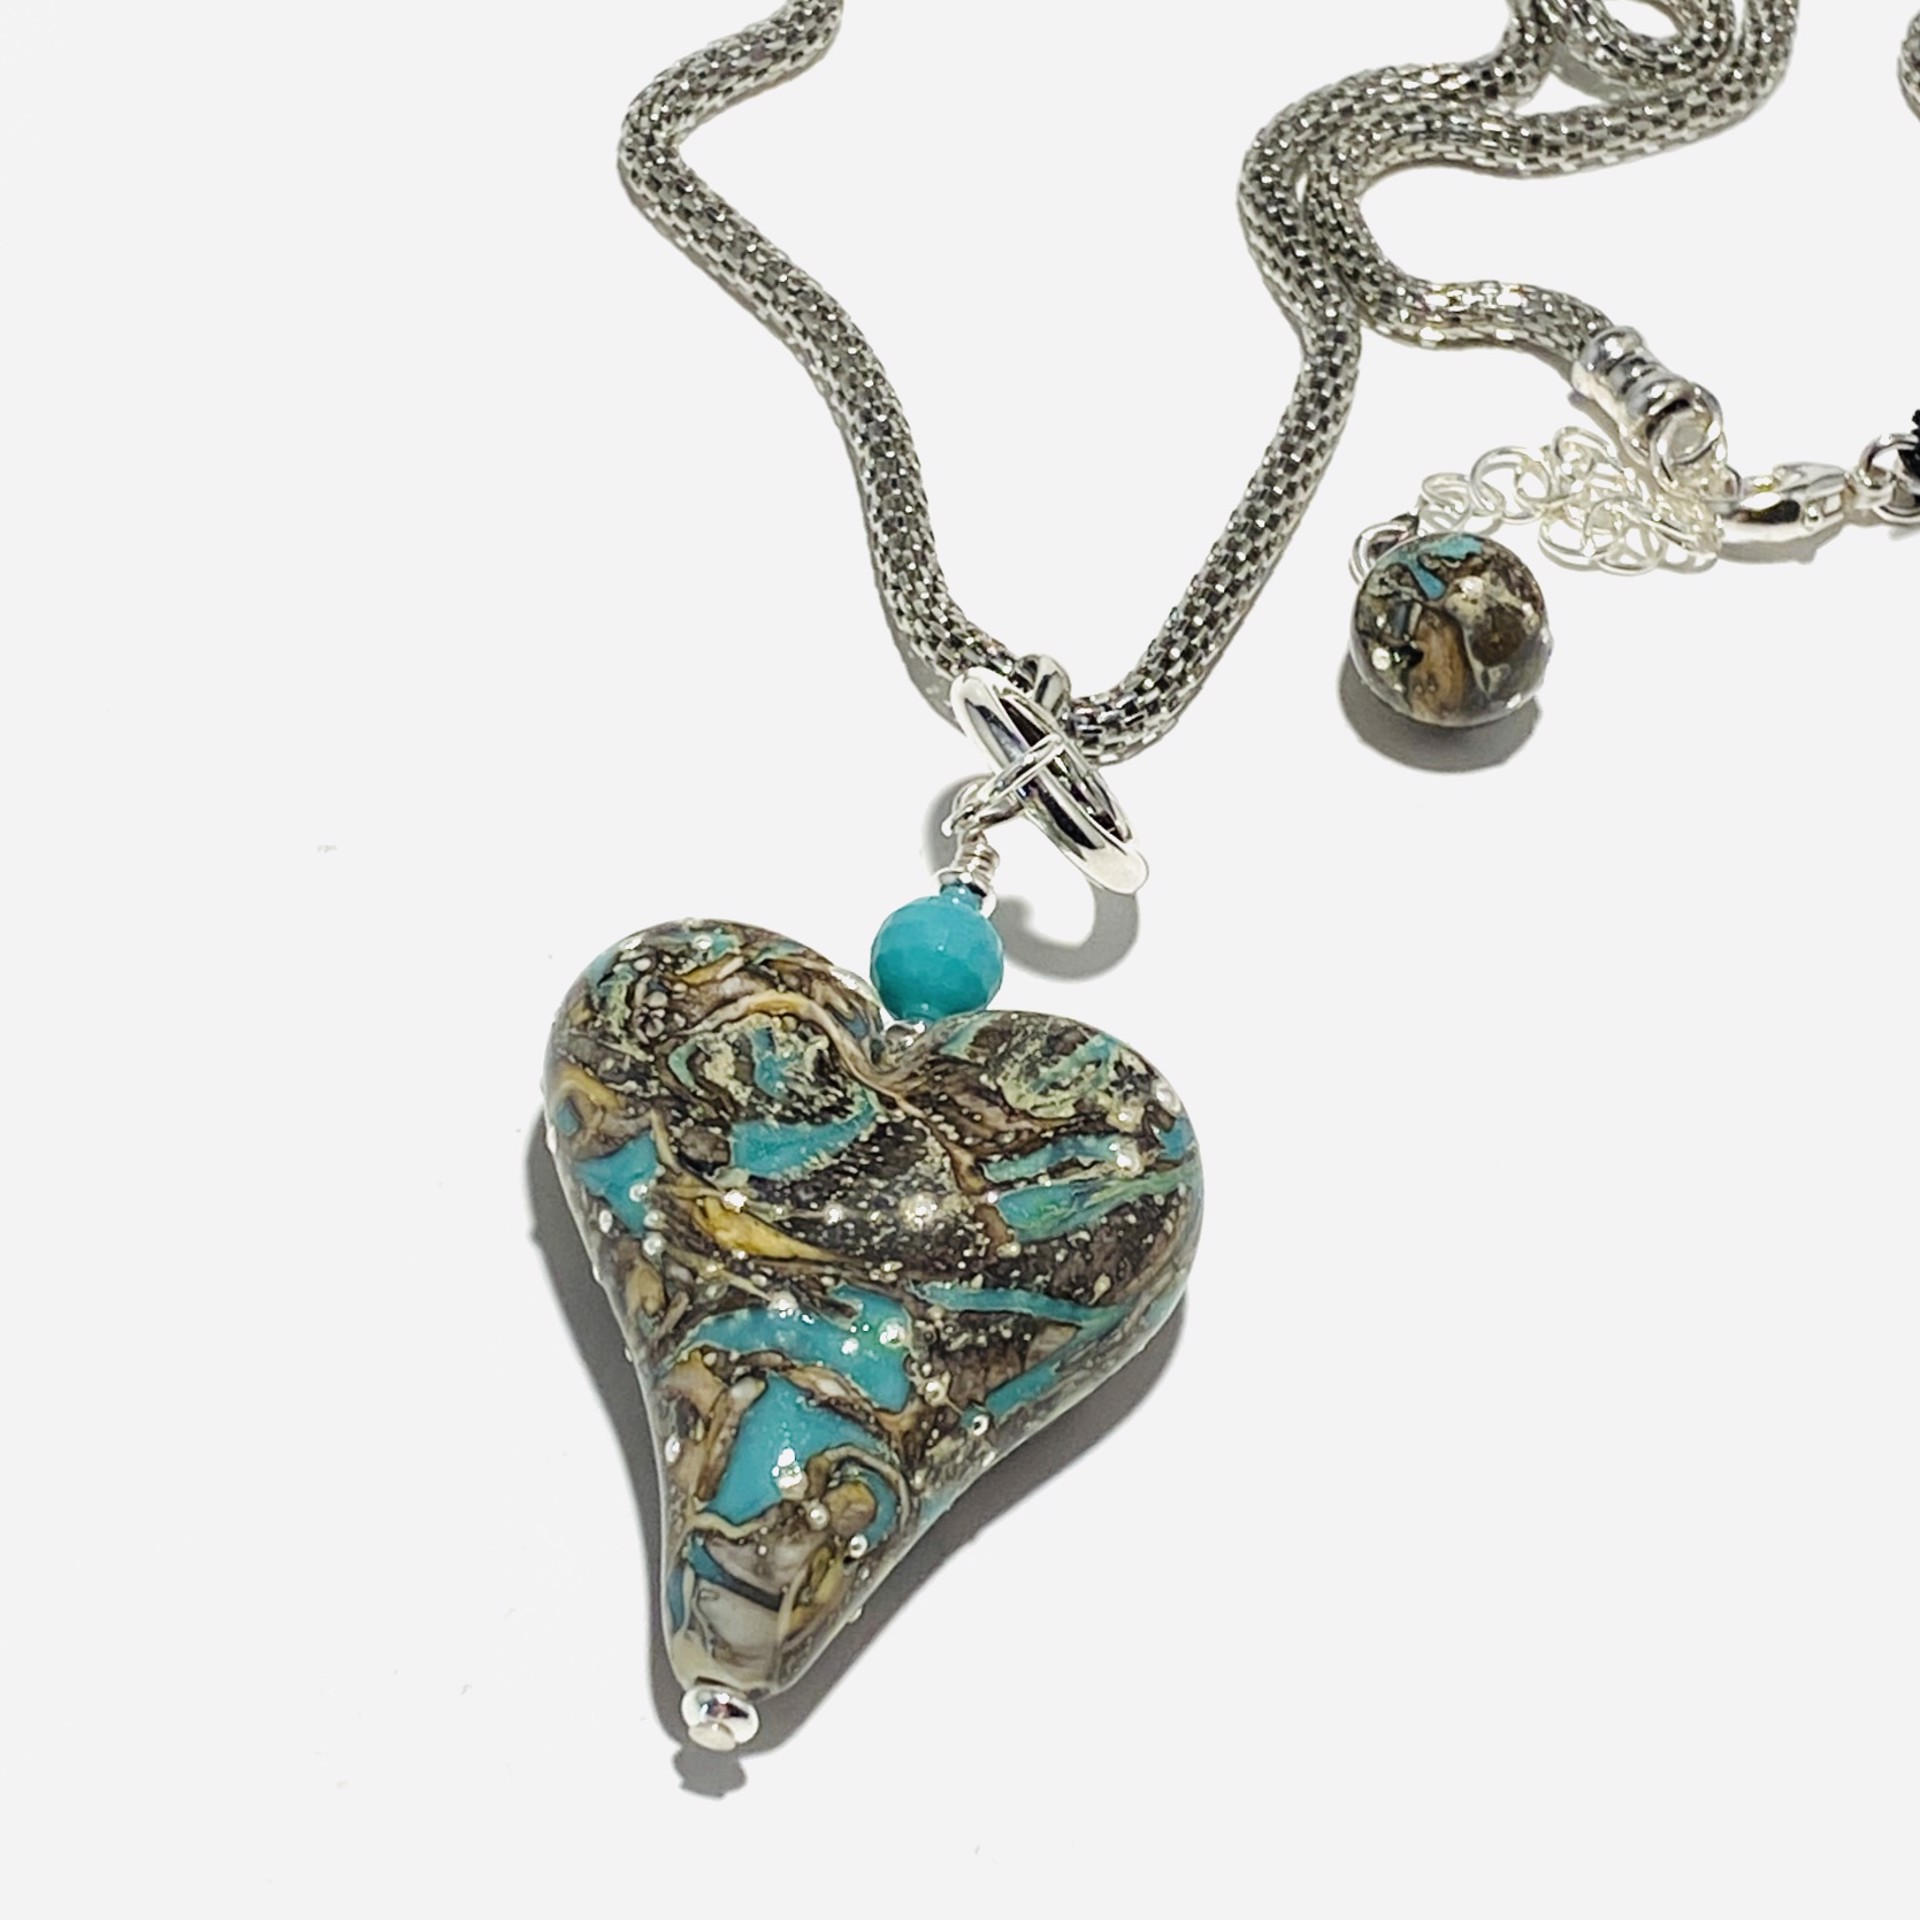 LS23-2A Silver Leaf Shards Turquoise Heart on Charm Bail Silver Mesh Chain Necklace by Linda Sacra